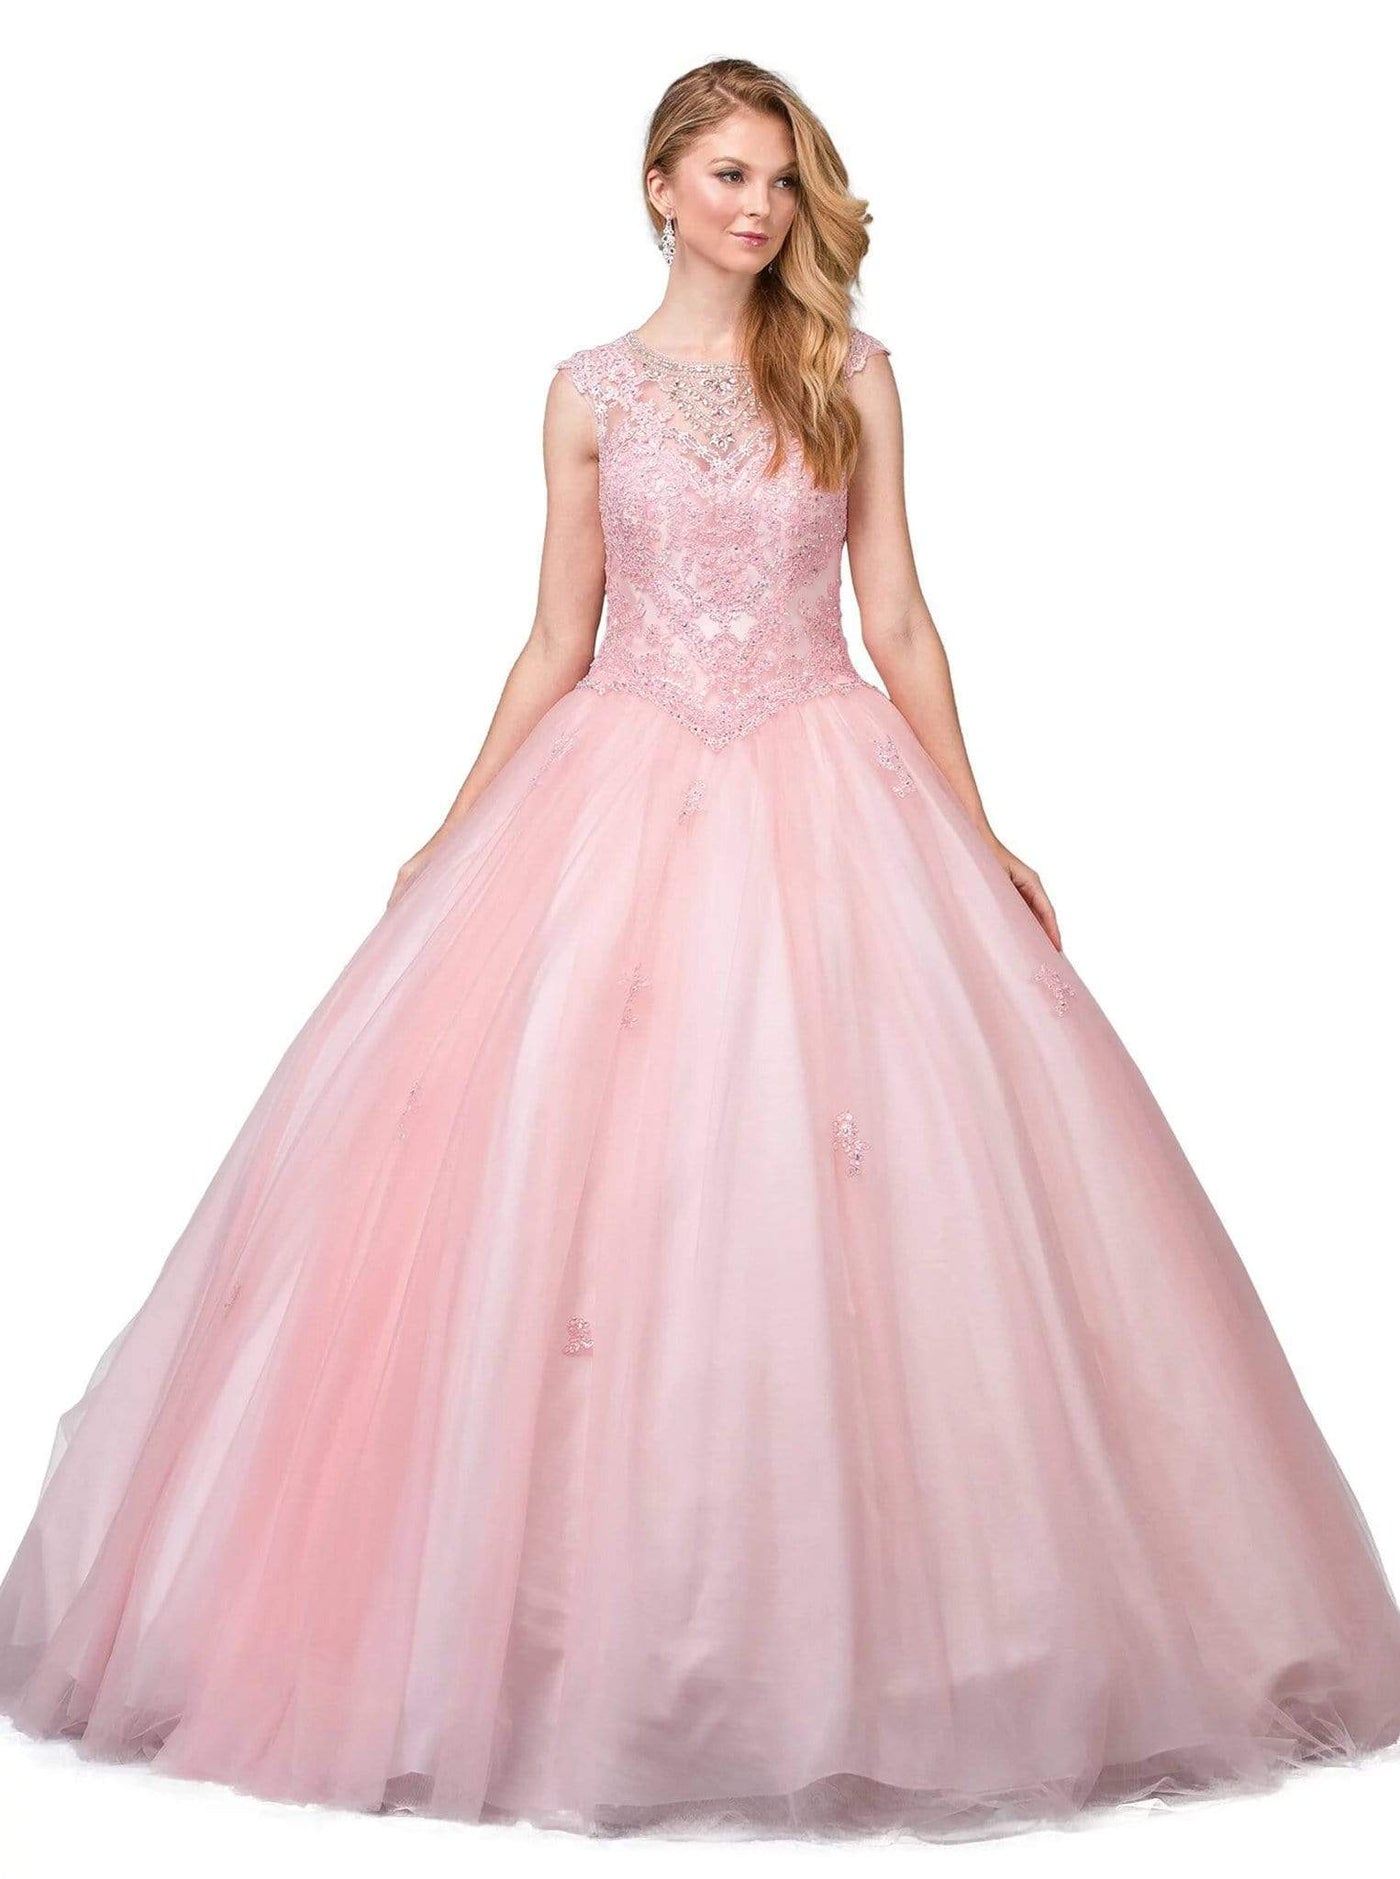 Dancing Queen - 1223 Cap Sleeve Beaded Applique Ballgown Special Occasion Dress XS / Blush